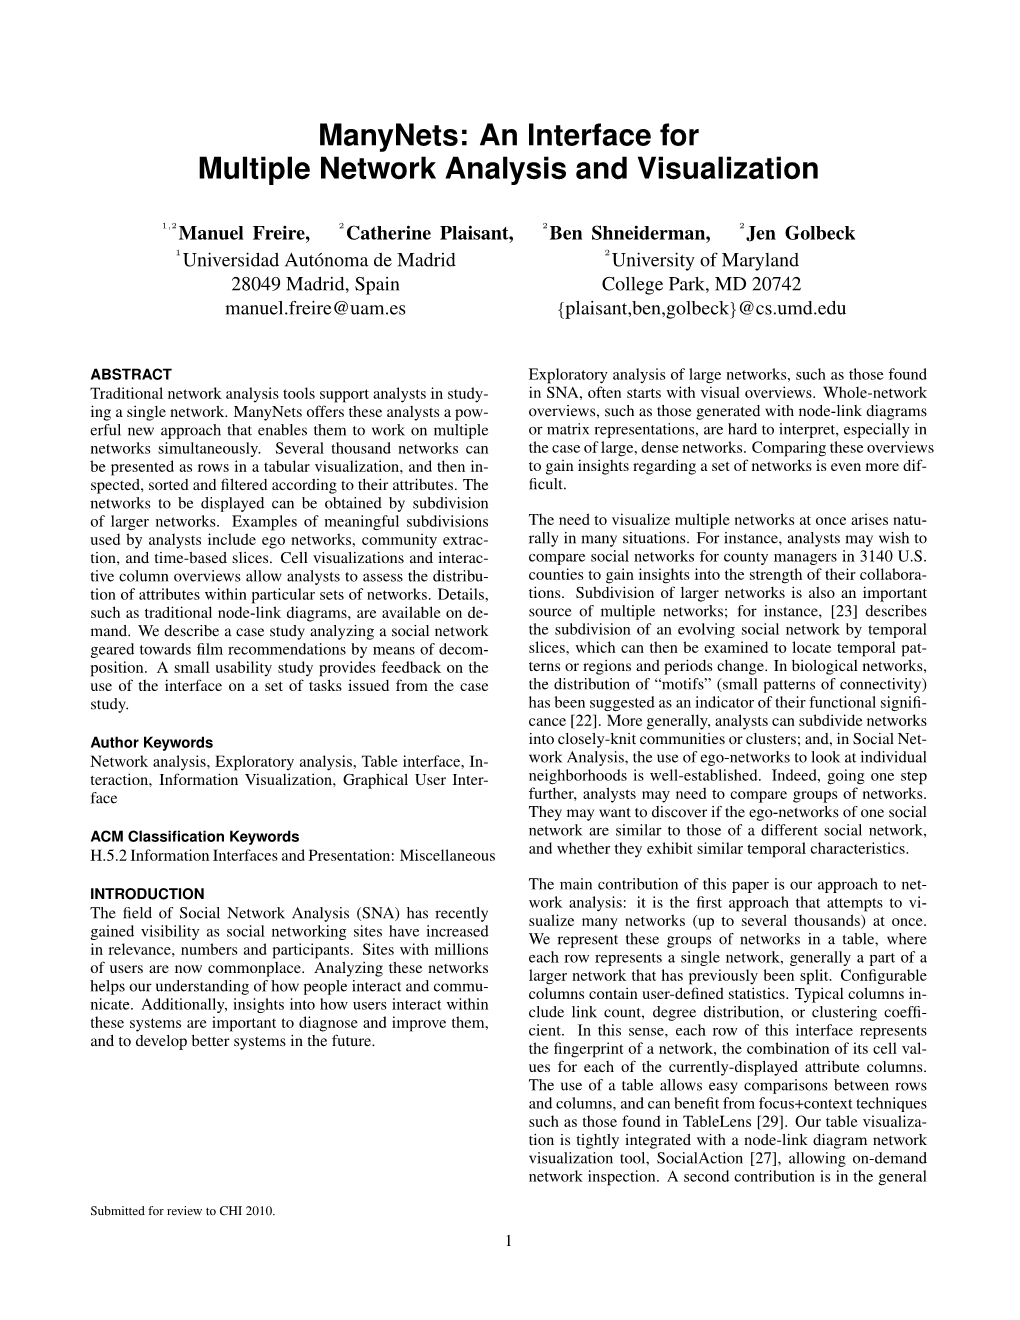 An Interface for Multiple Network Analysis and Visualization